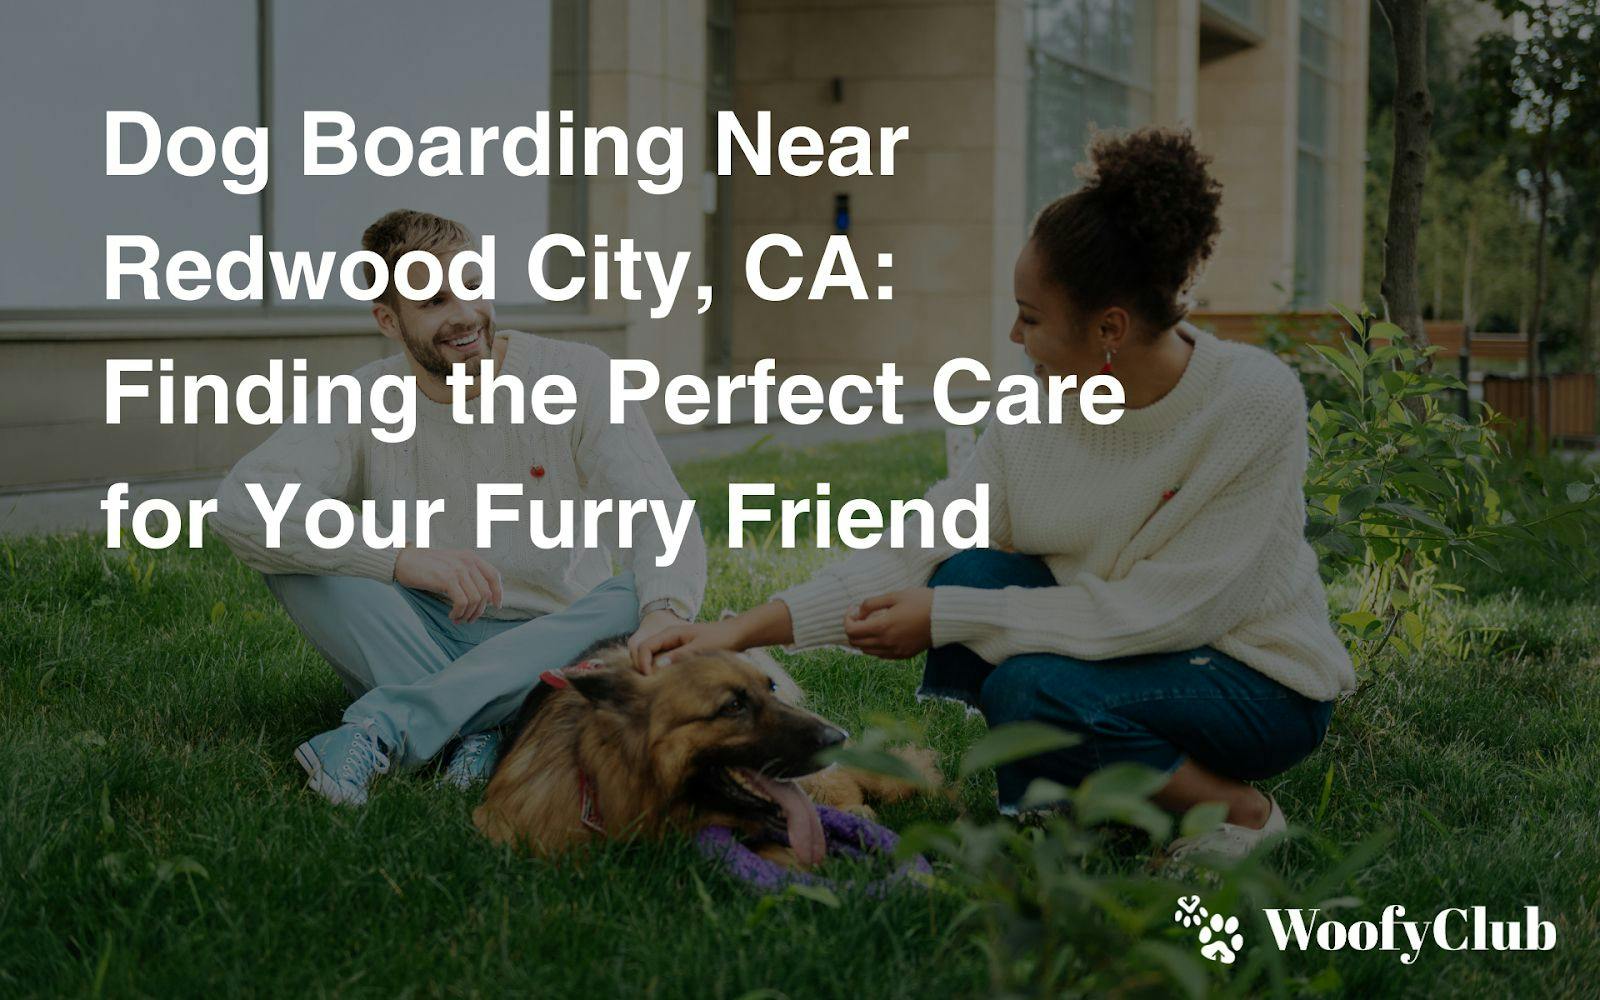 Dog Boarding Near Redwood City, CA: Finding The Perfect Care For Your Furry Friend